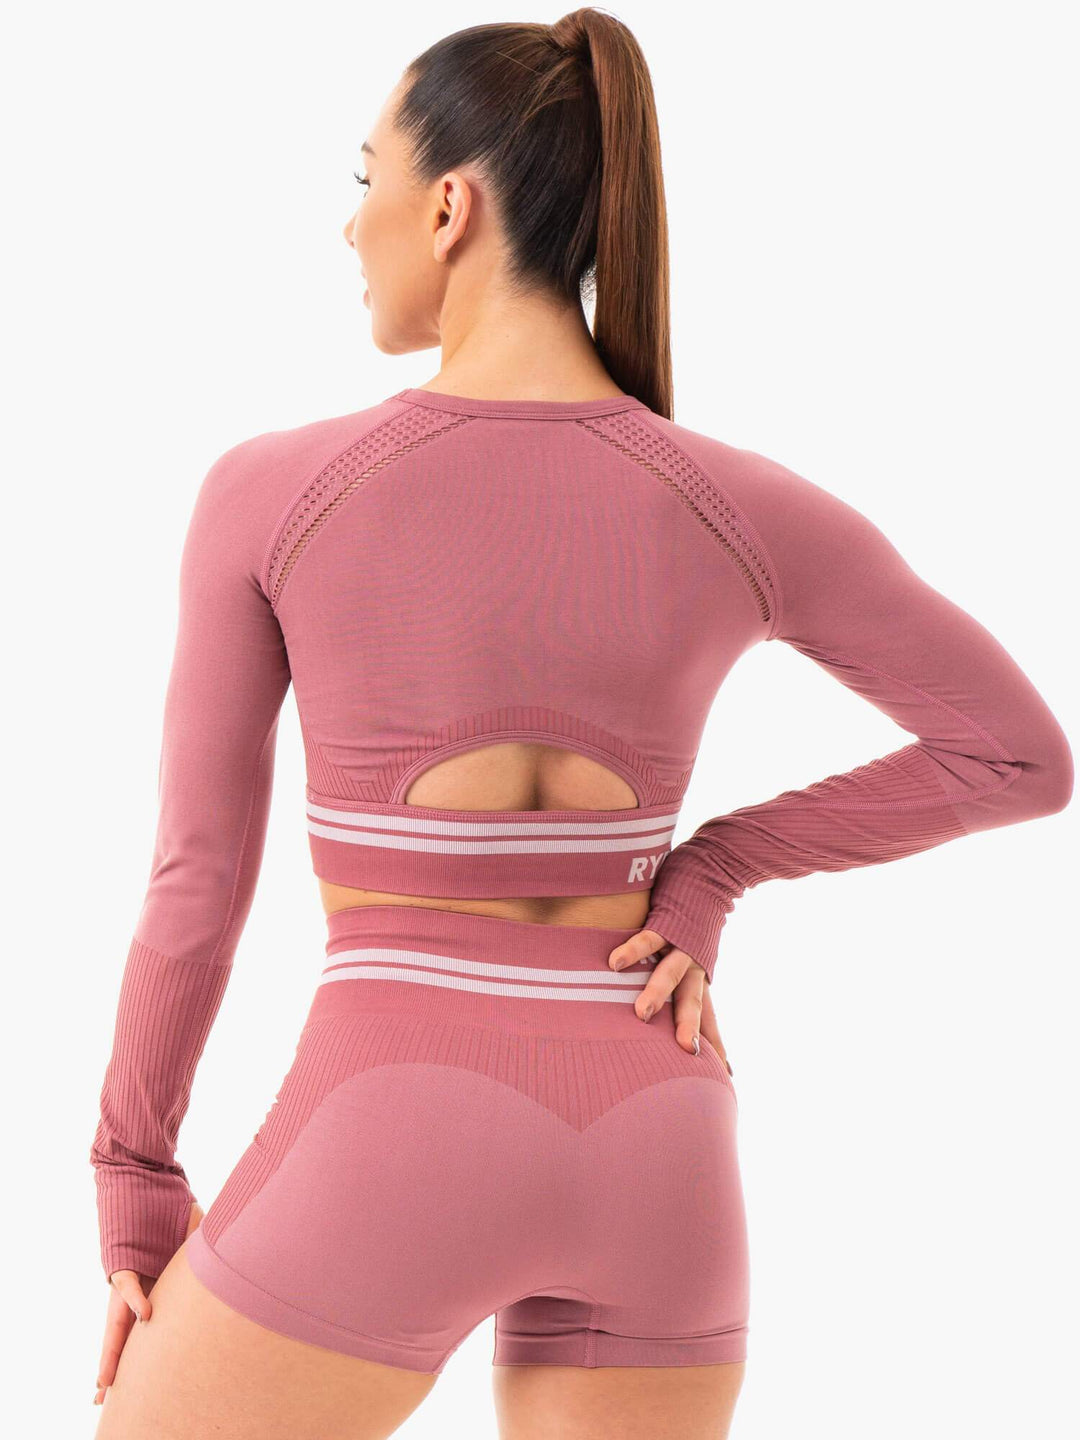 Freestyle Seamless Long Sleeve Crop - Dusty Pink Clothing Ryderwear 